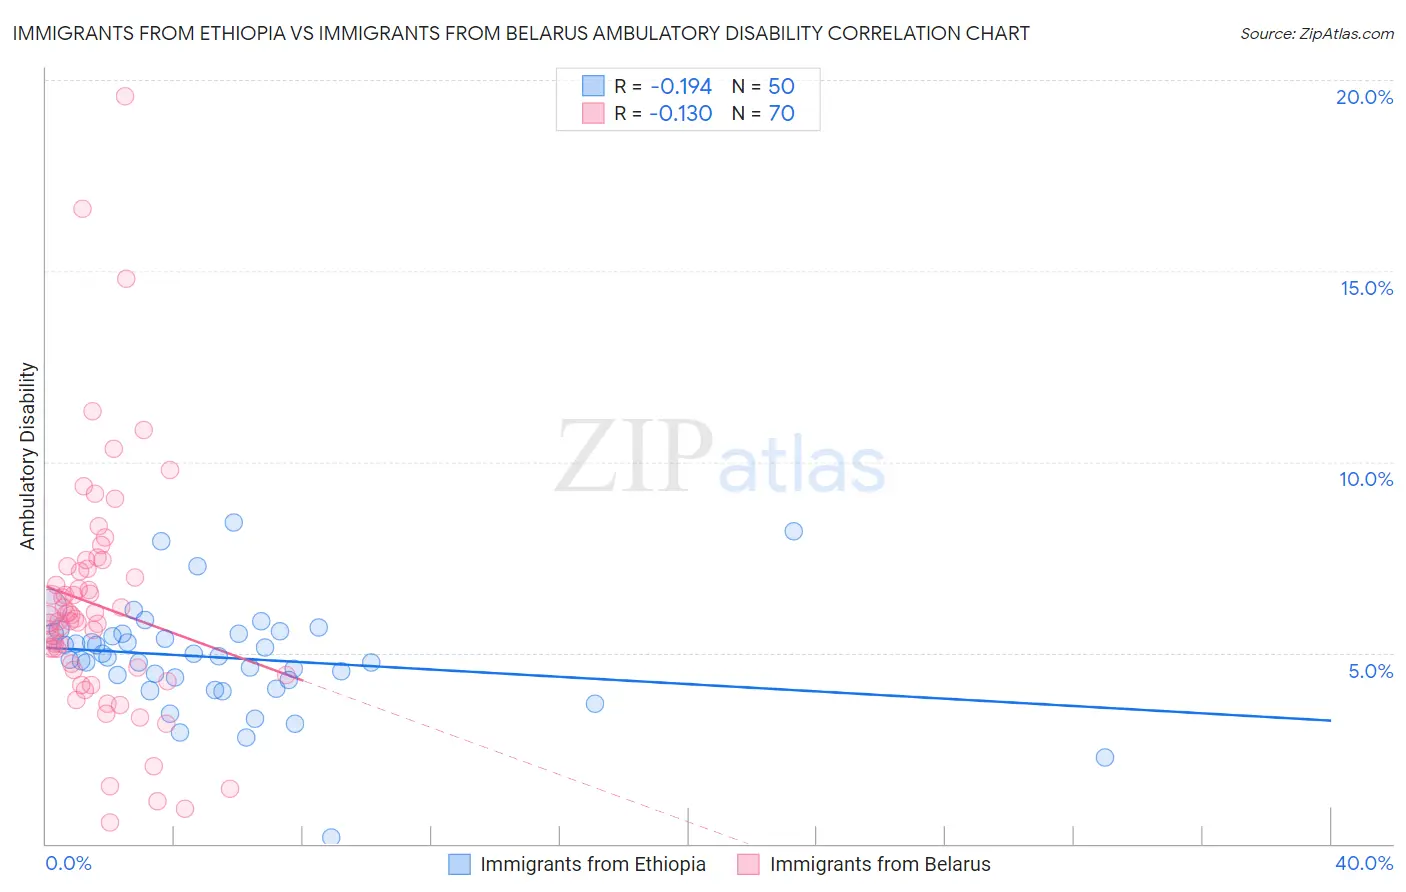 Immigrants from Ethiopia vs Immigrants from Belarus Ambulatory Disability